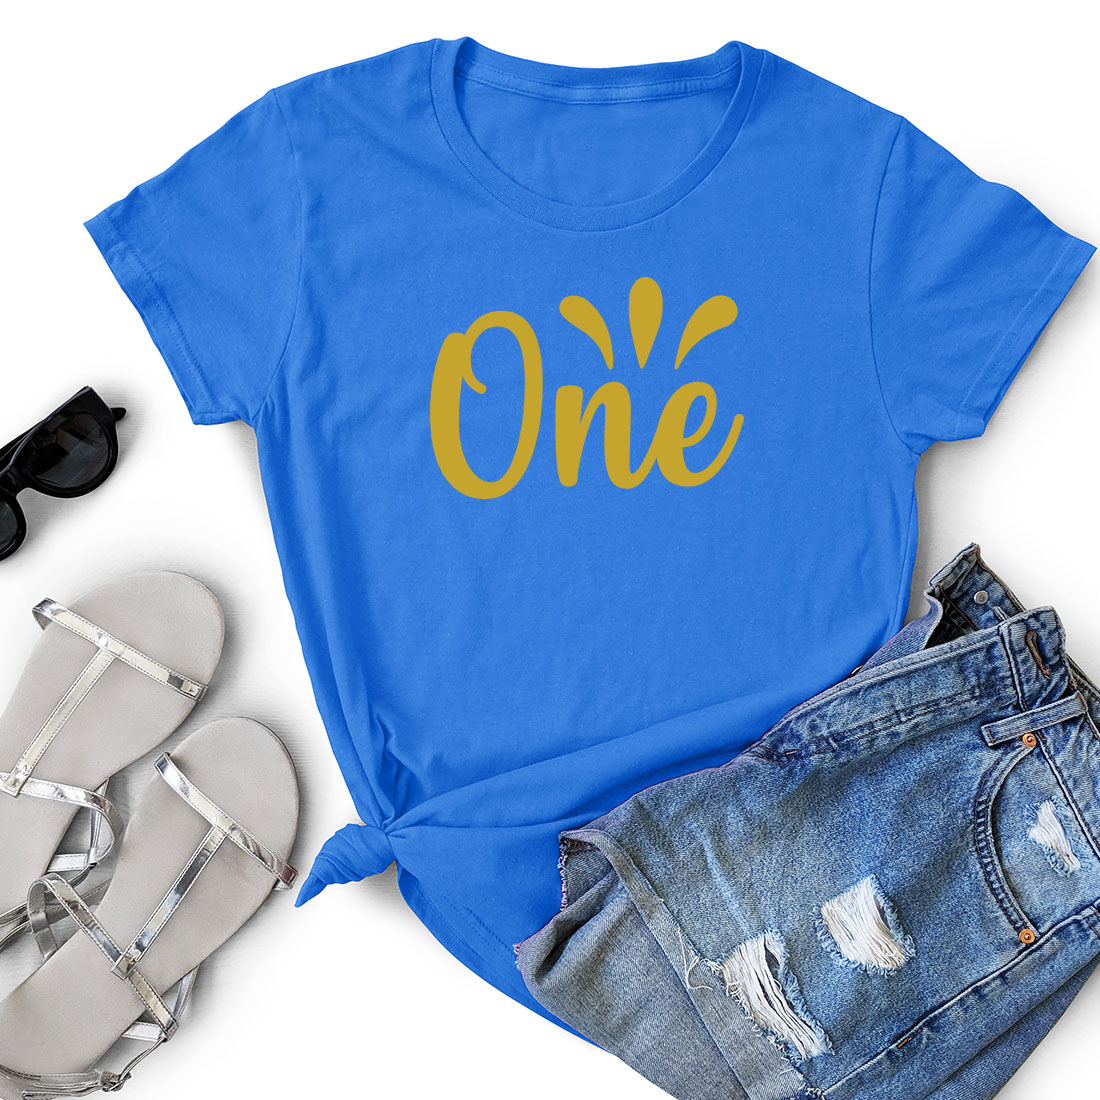 T - shirt with the word one on it next to a pair of shorts.